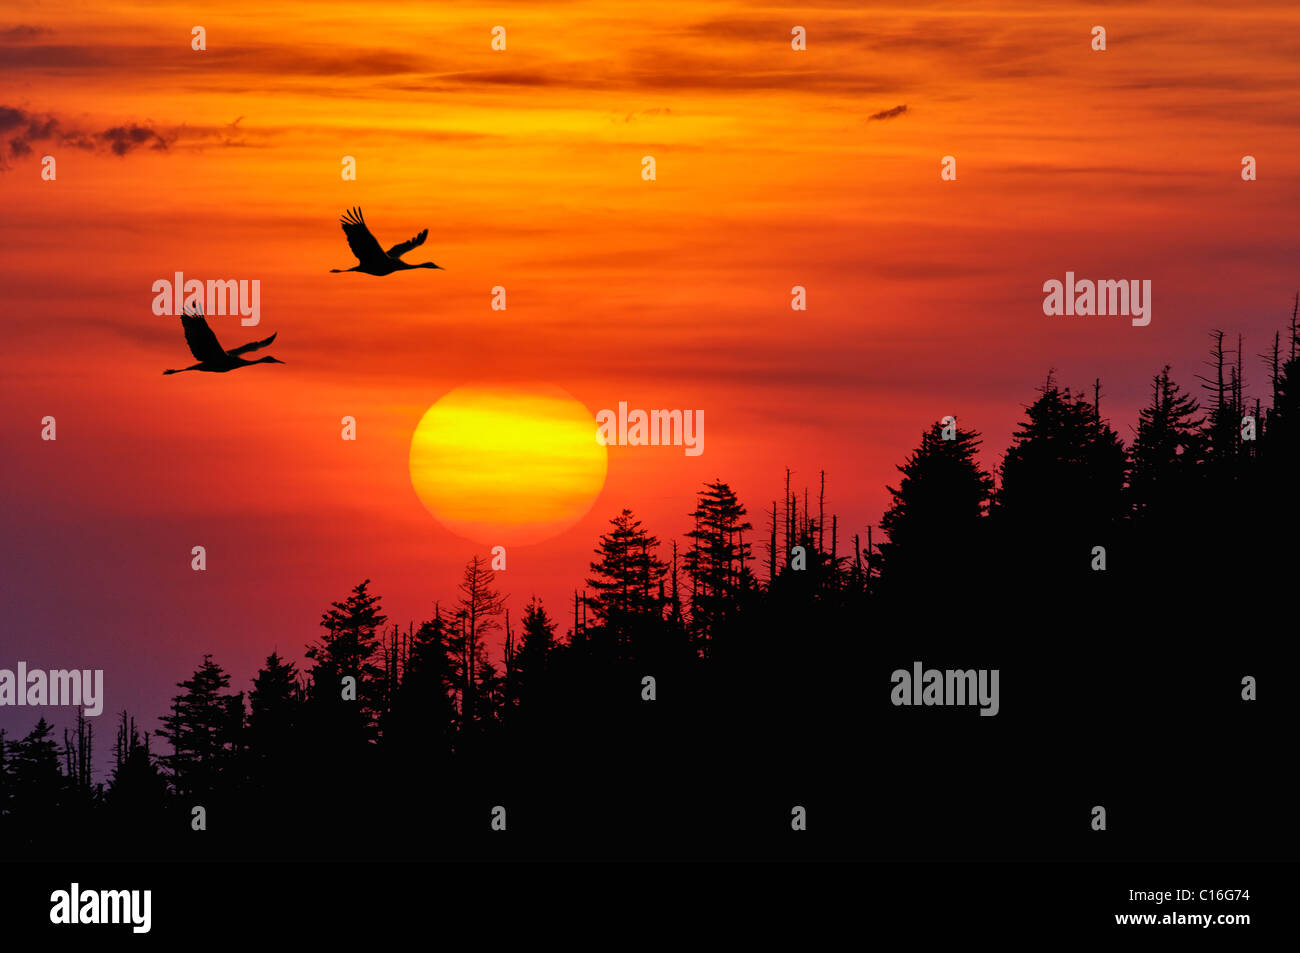 Sandhill Cranes Silhouetted Flying against a Sunset in the Smoky Mountains National Park in Tennessee Stock Photo